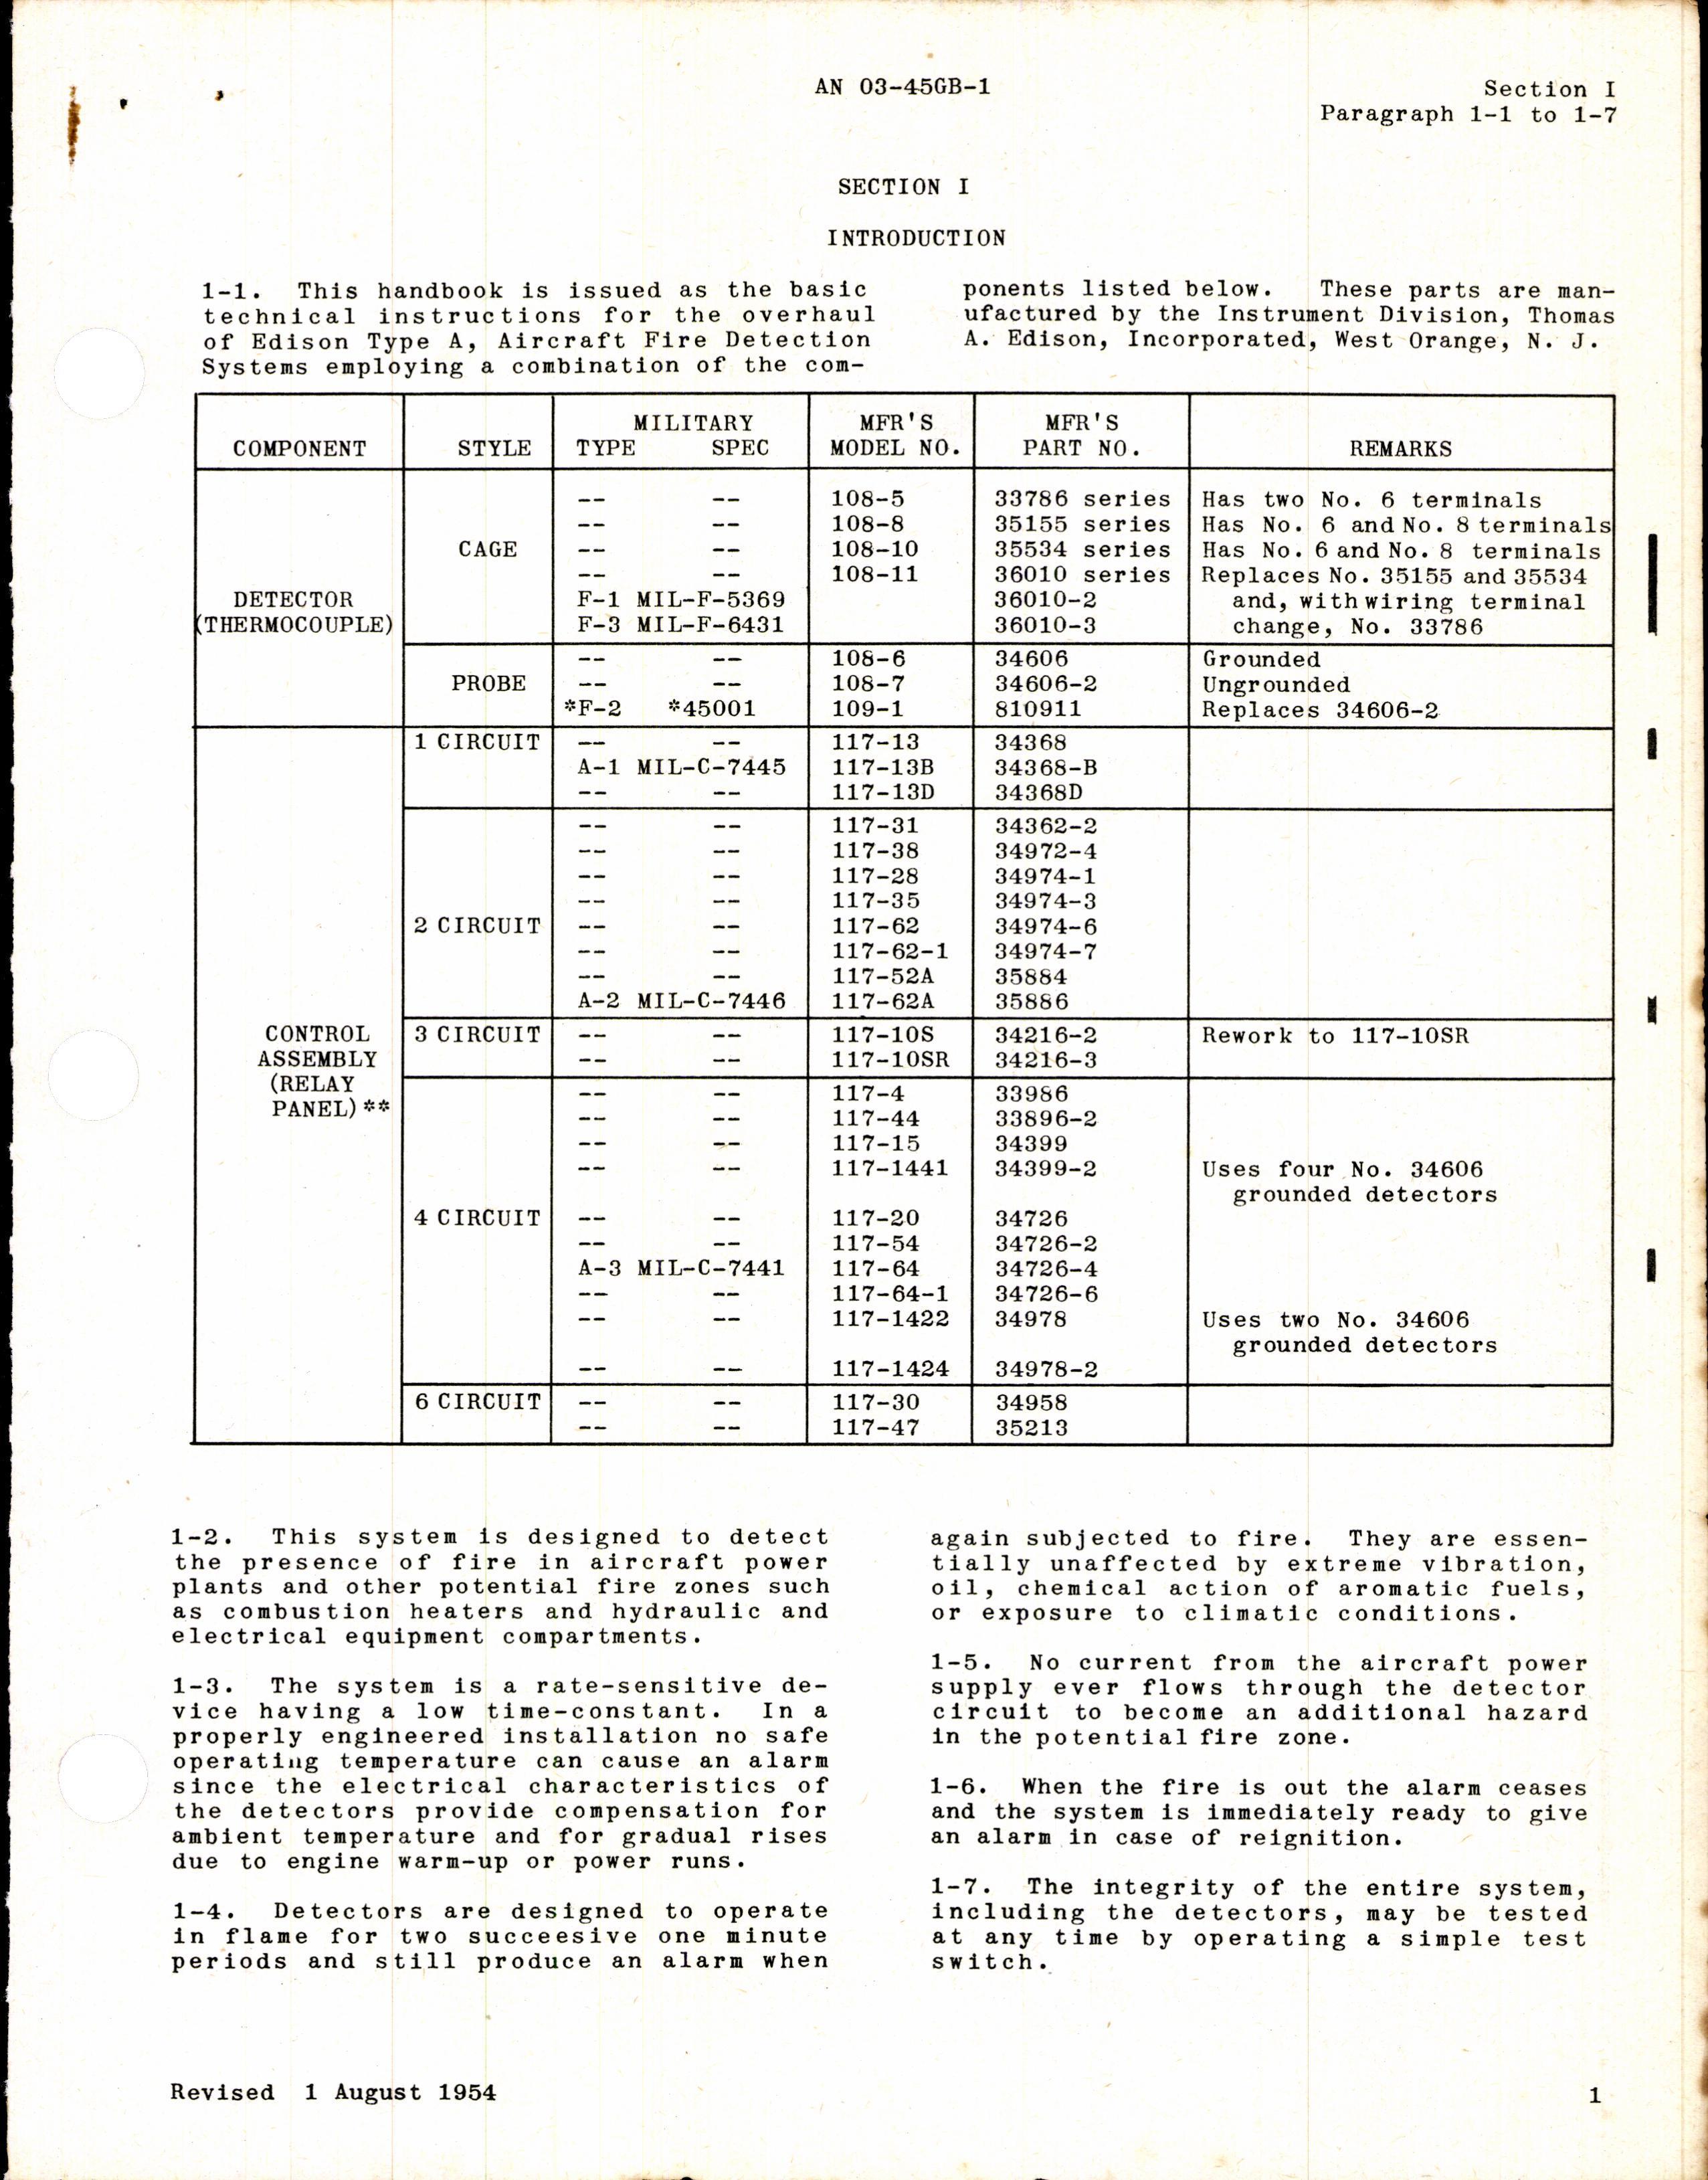 Sample page 3 from AirCorps Library document: Overhaul Instructions for Aircraft Fire Detection System Type A